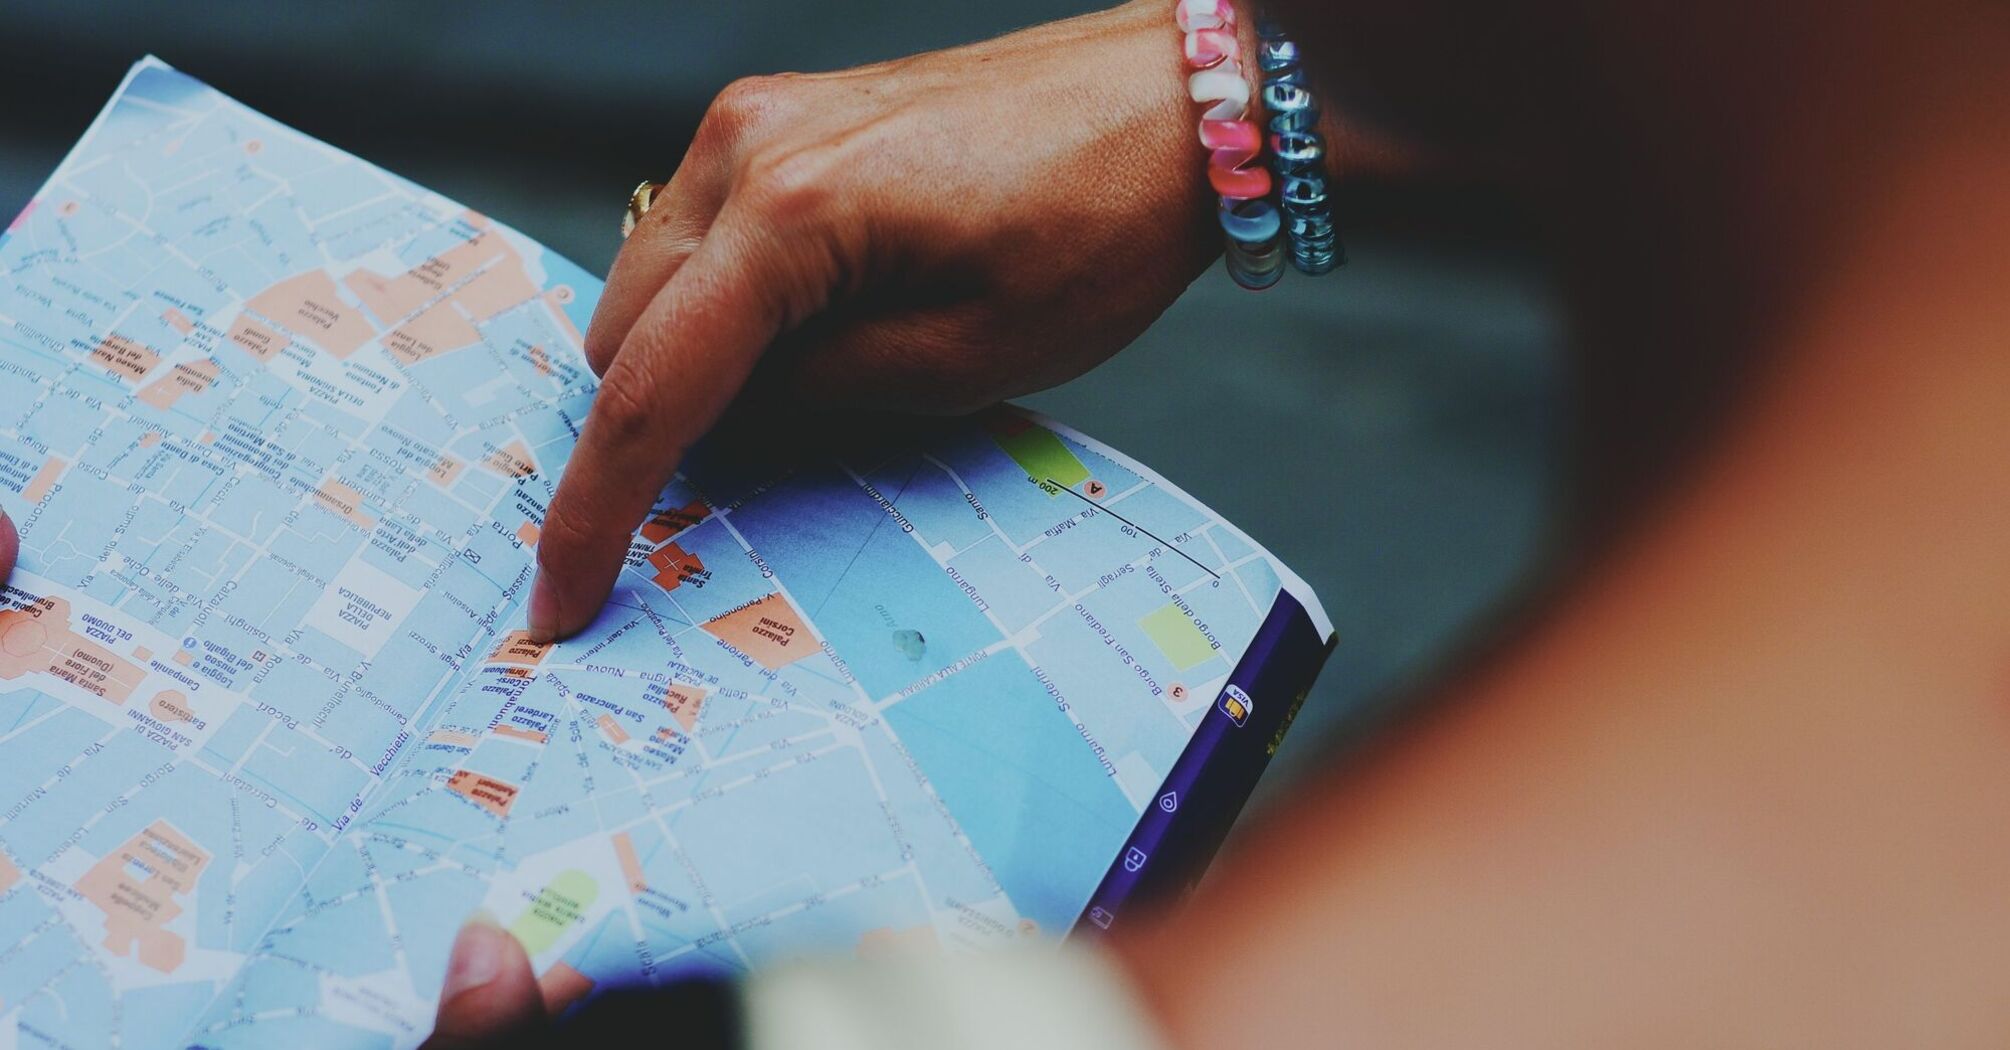 A person pointing at a location on a map